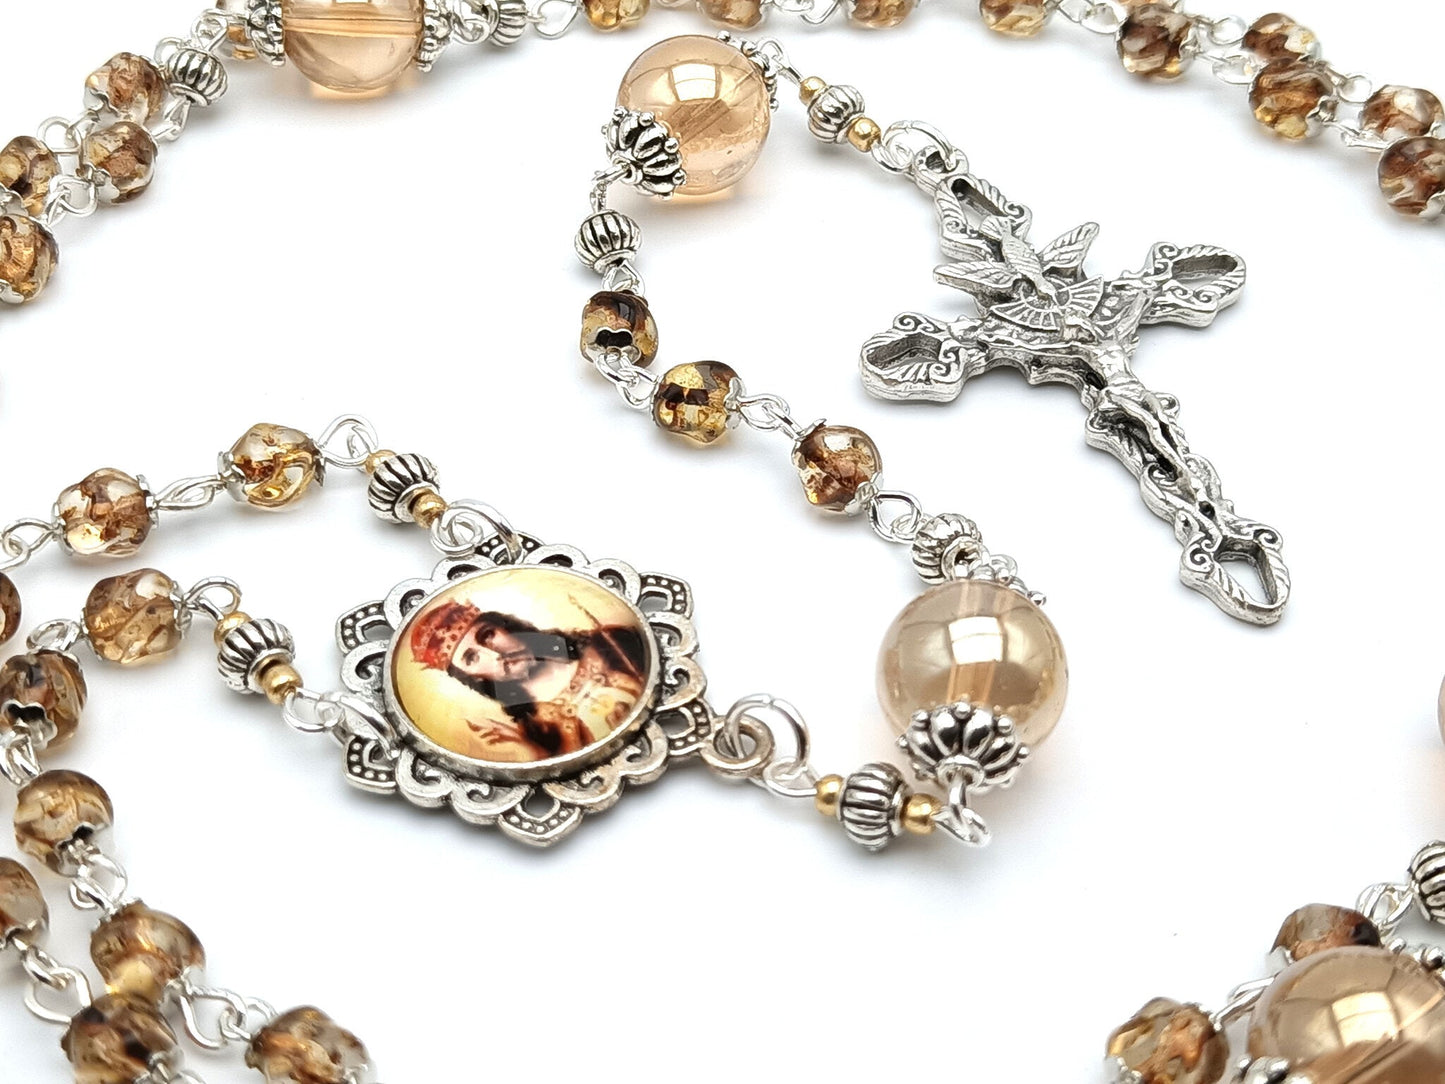 Christ the King unique rosary beads with nugget amber glass beads, silver Holy Spirit crucifix and picture centre medal.